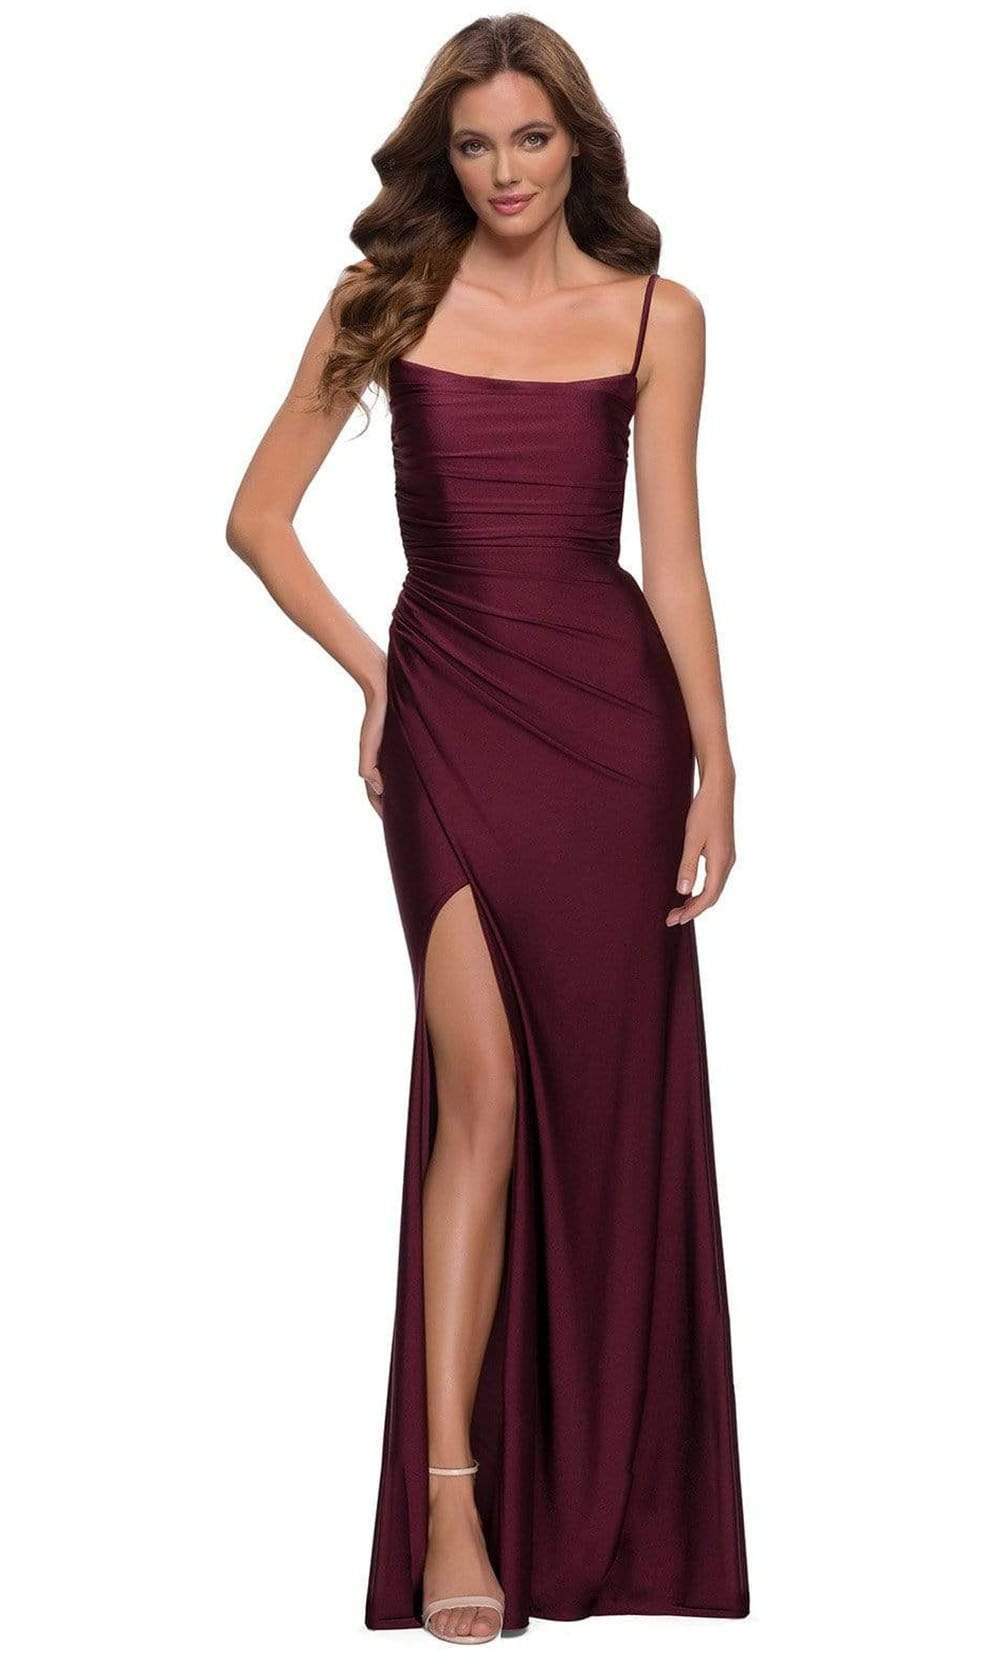 Image of La Femme - 29710 Draped Accented High Slit Sheath Gown